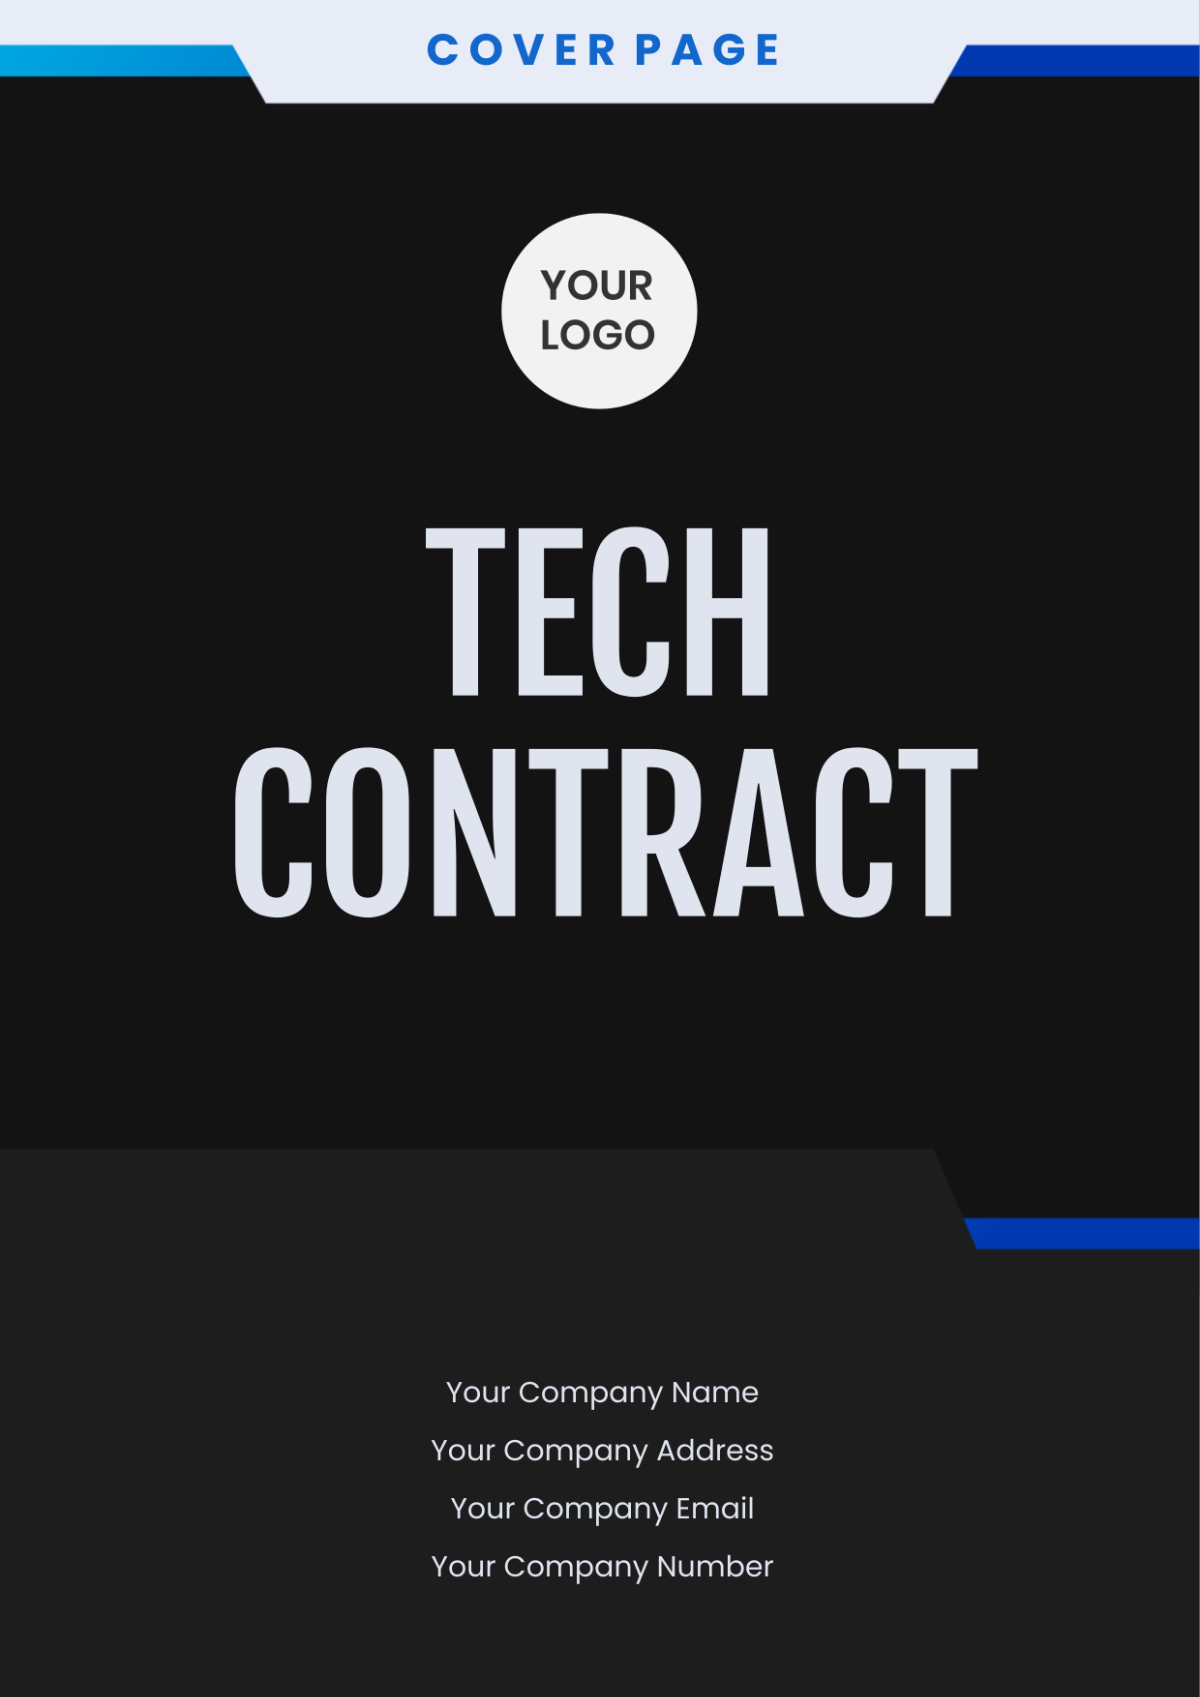 Tech Contract Cover Page